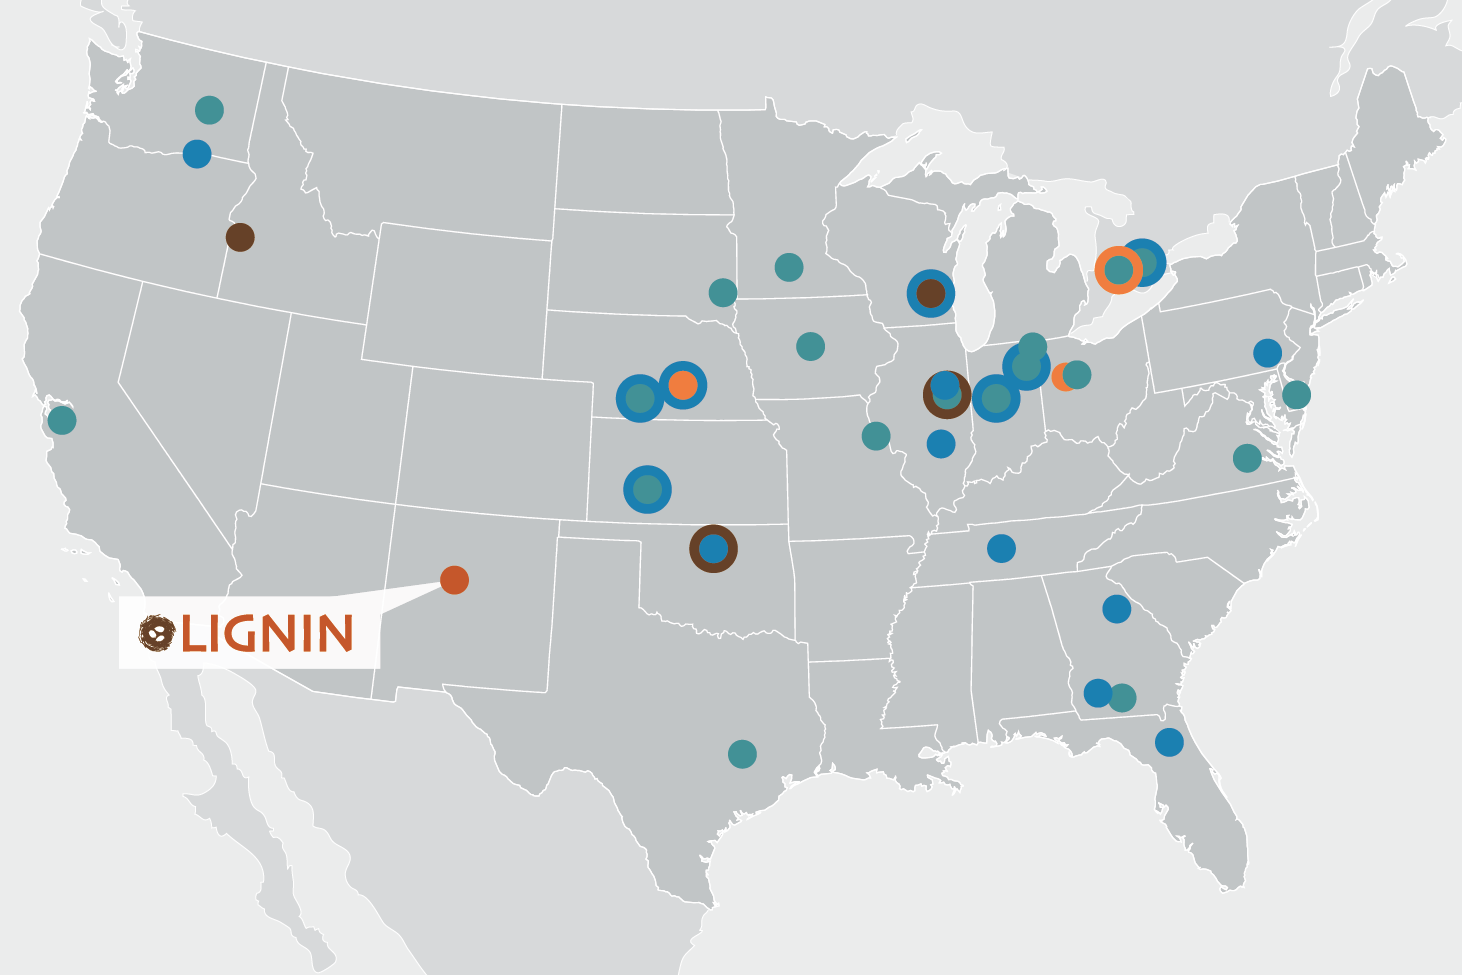 LIGNIN Instruments are all over the map!